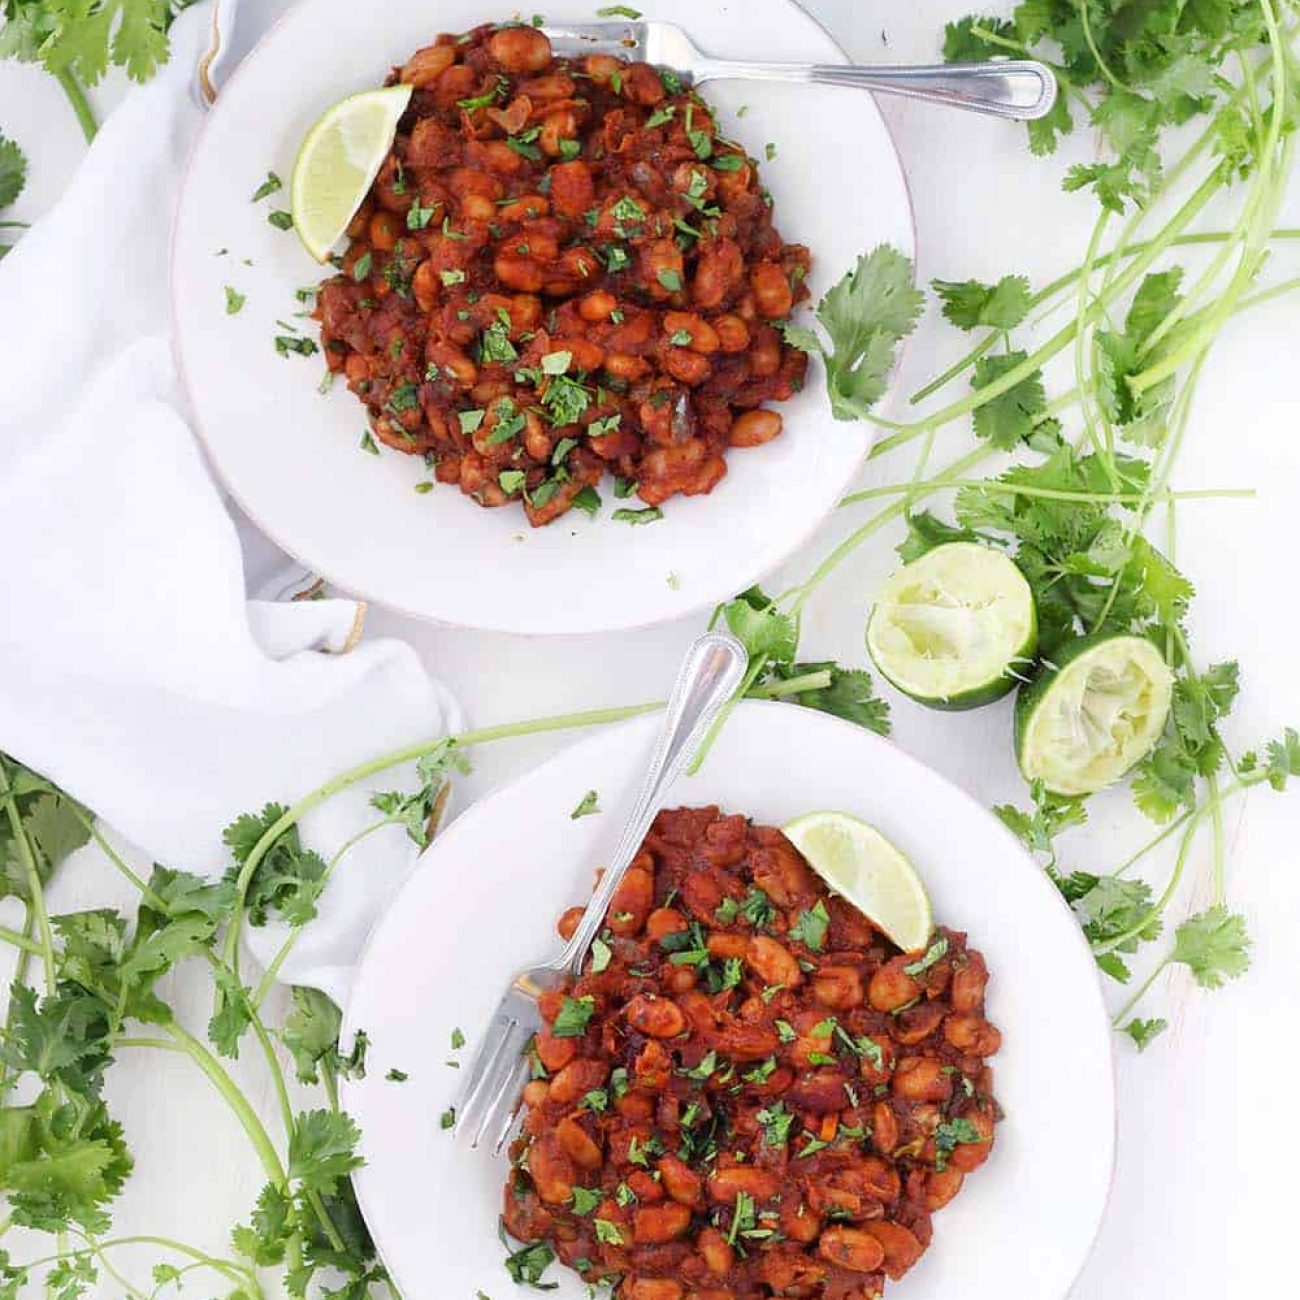 Baked Beans With A Spicy Twist